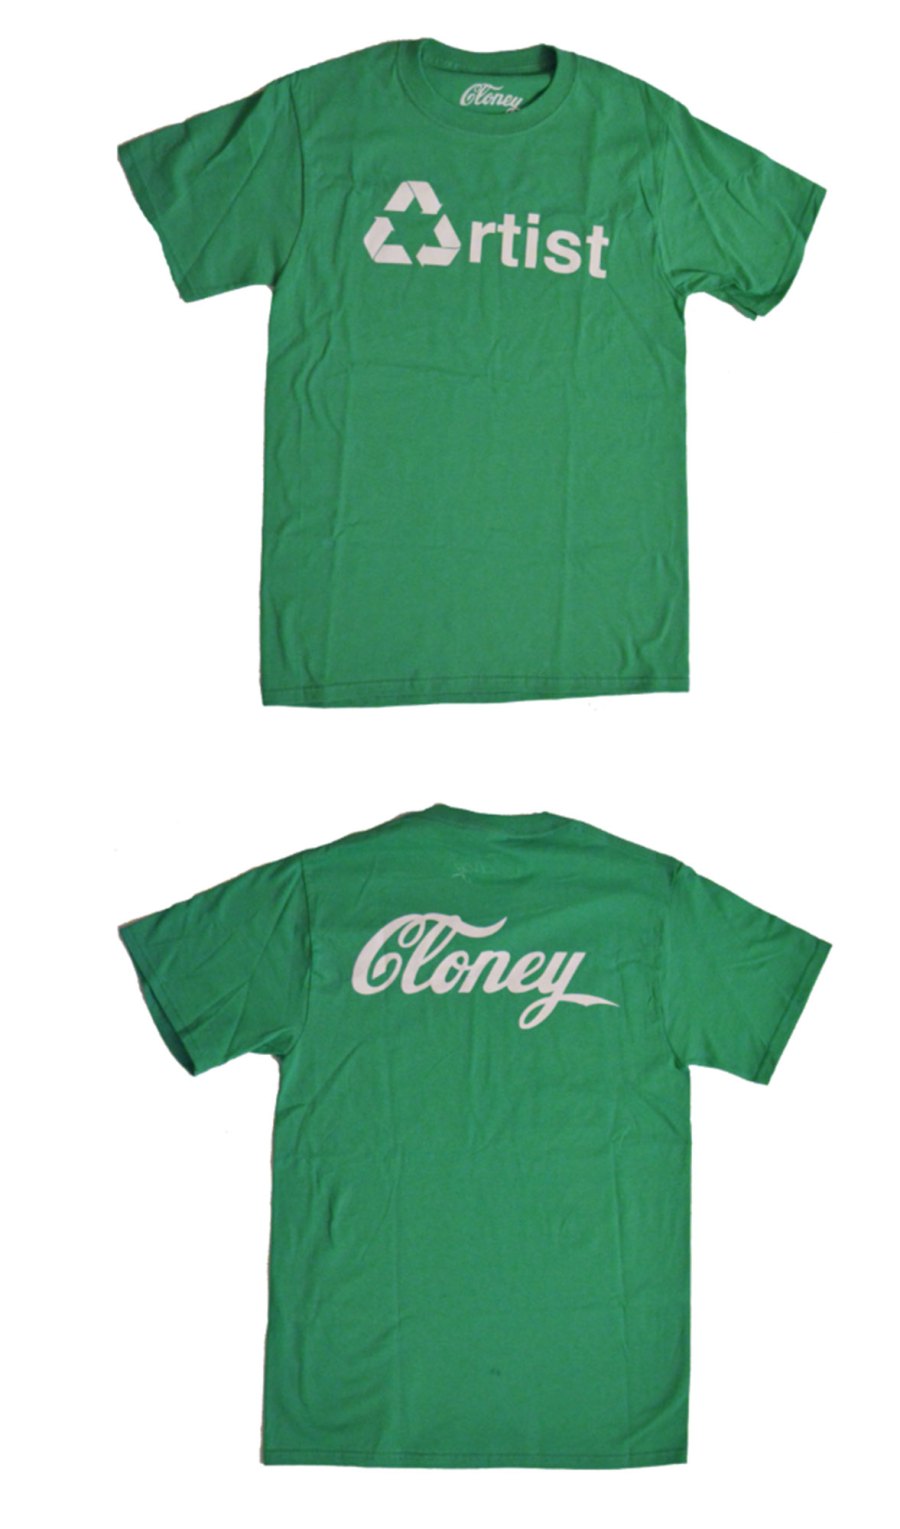 Cloney Is the Streetwear Brand That Ariana Grande and Justin Bieber Love